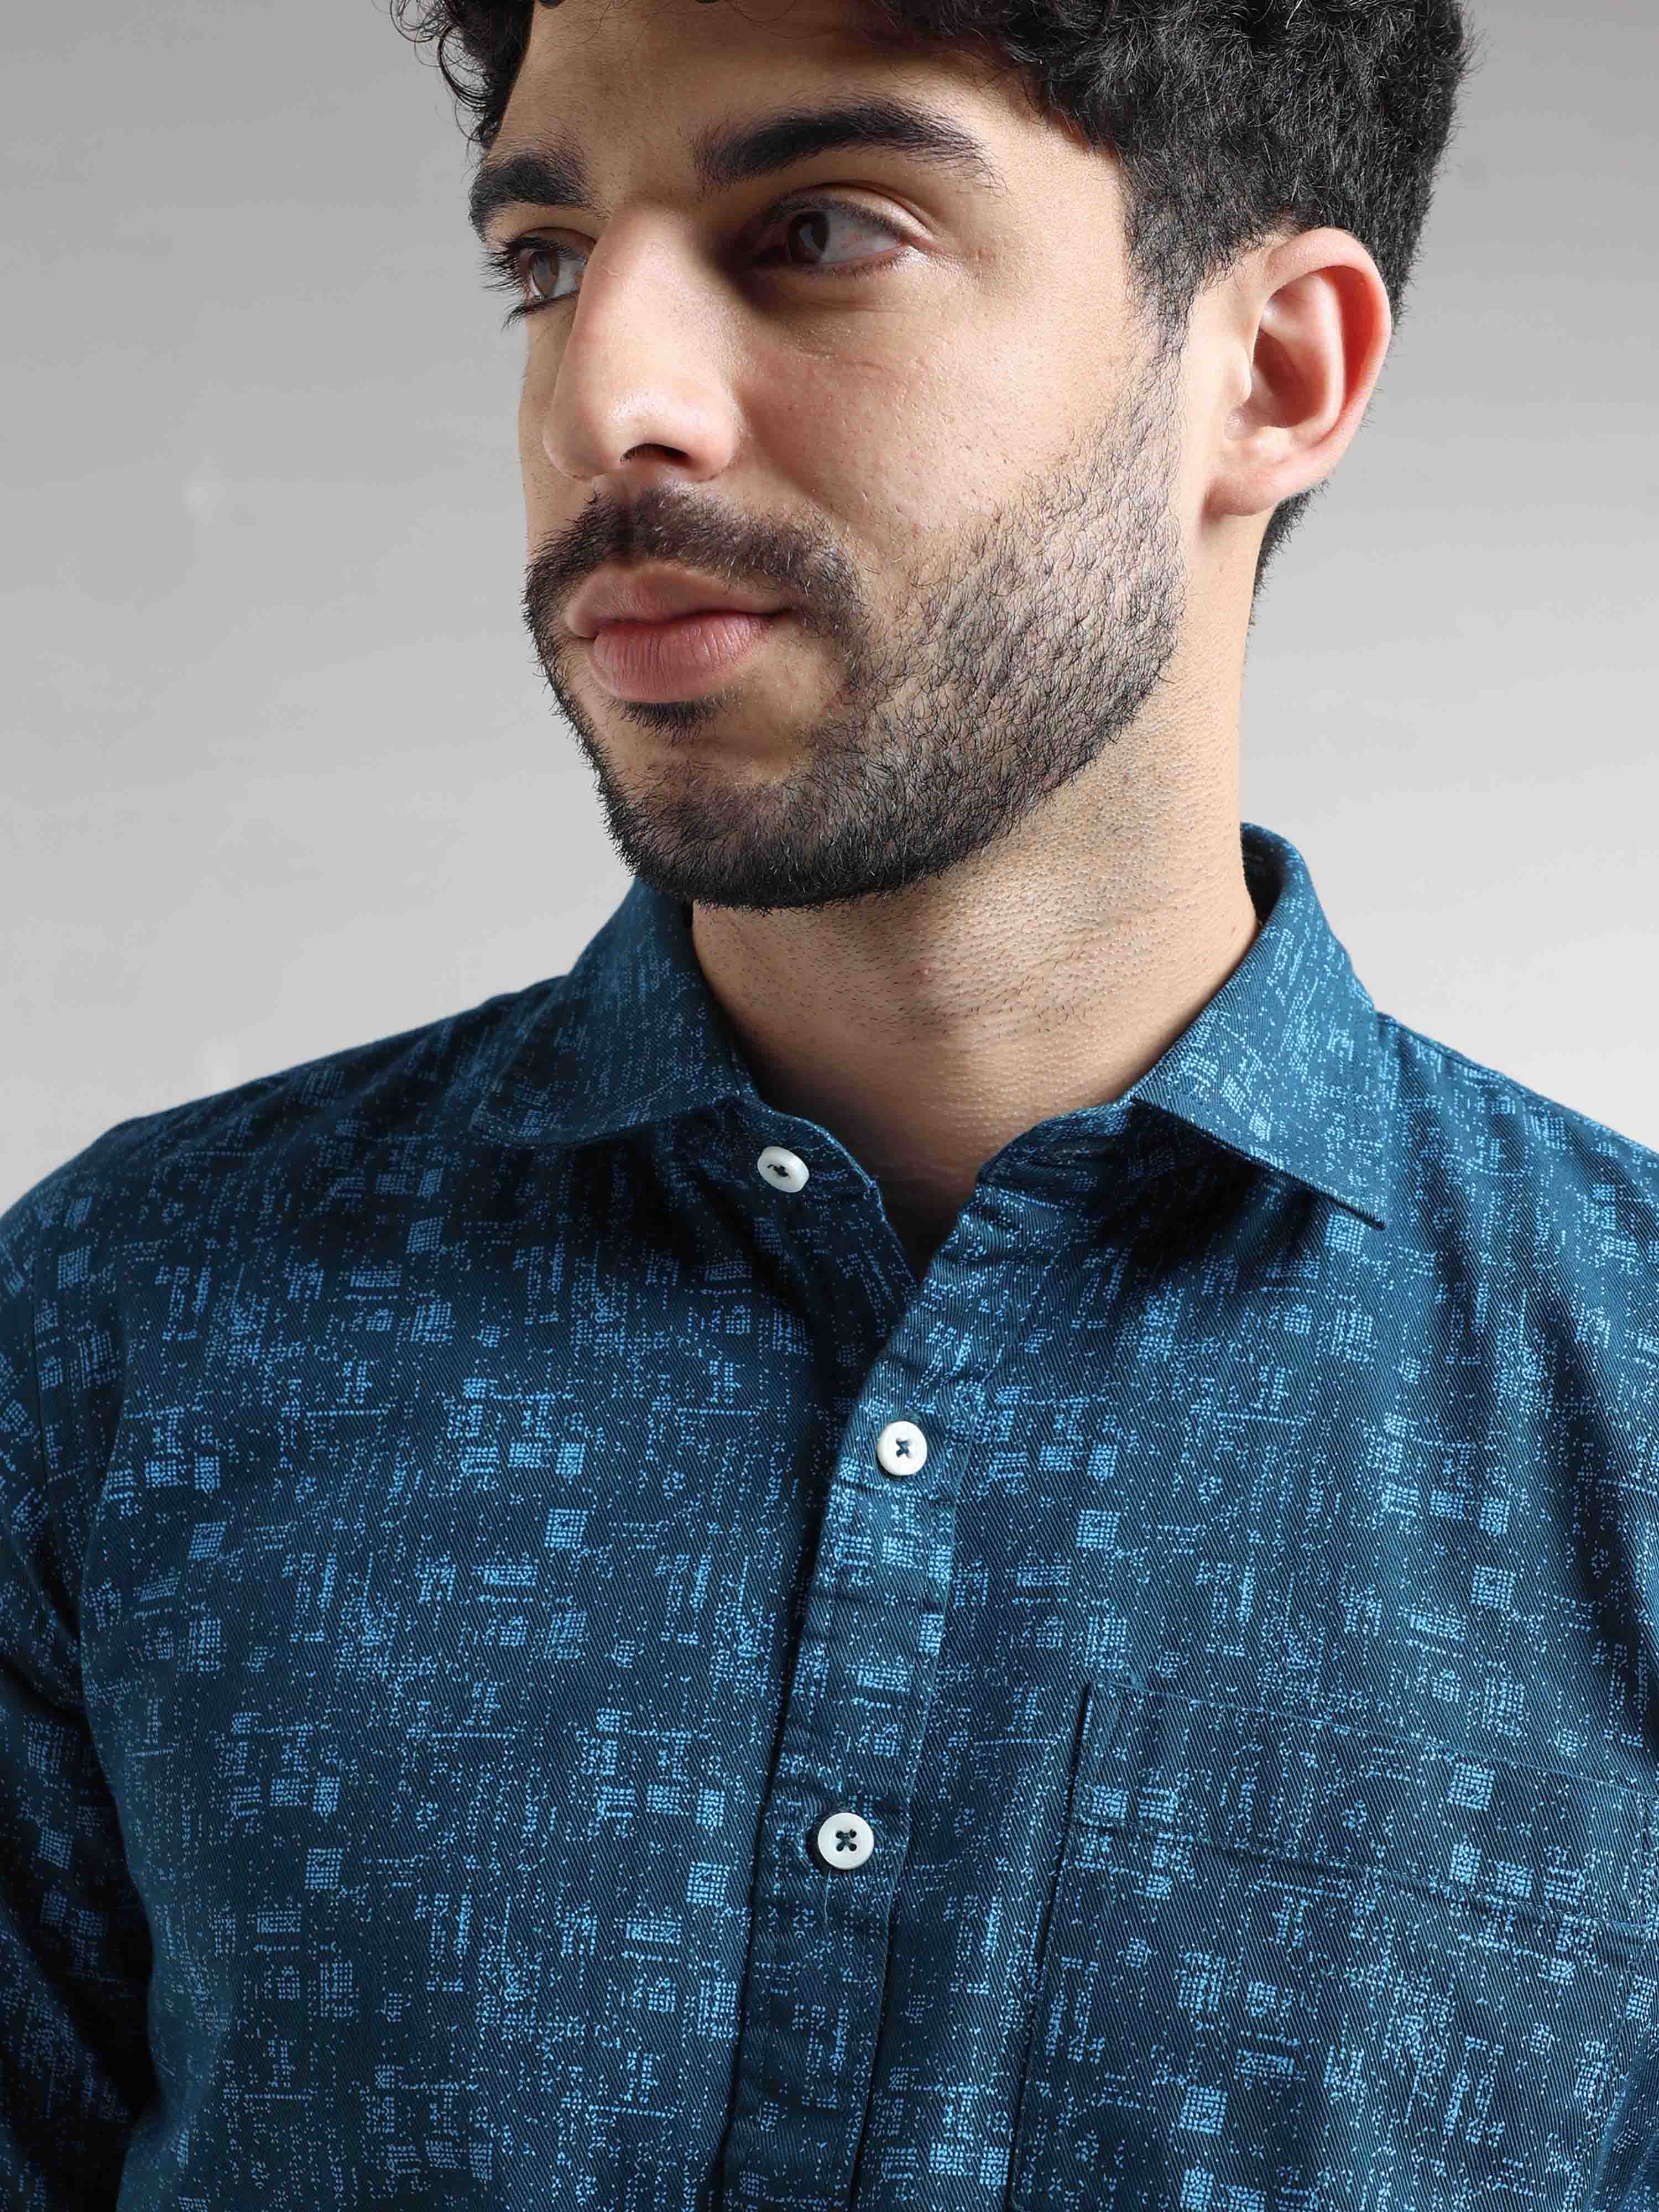 Buy Latest Dark Blue Printed Shirt Online at Great PriceRs. 1349.00